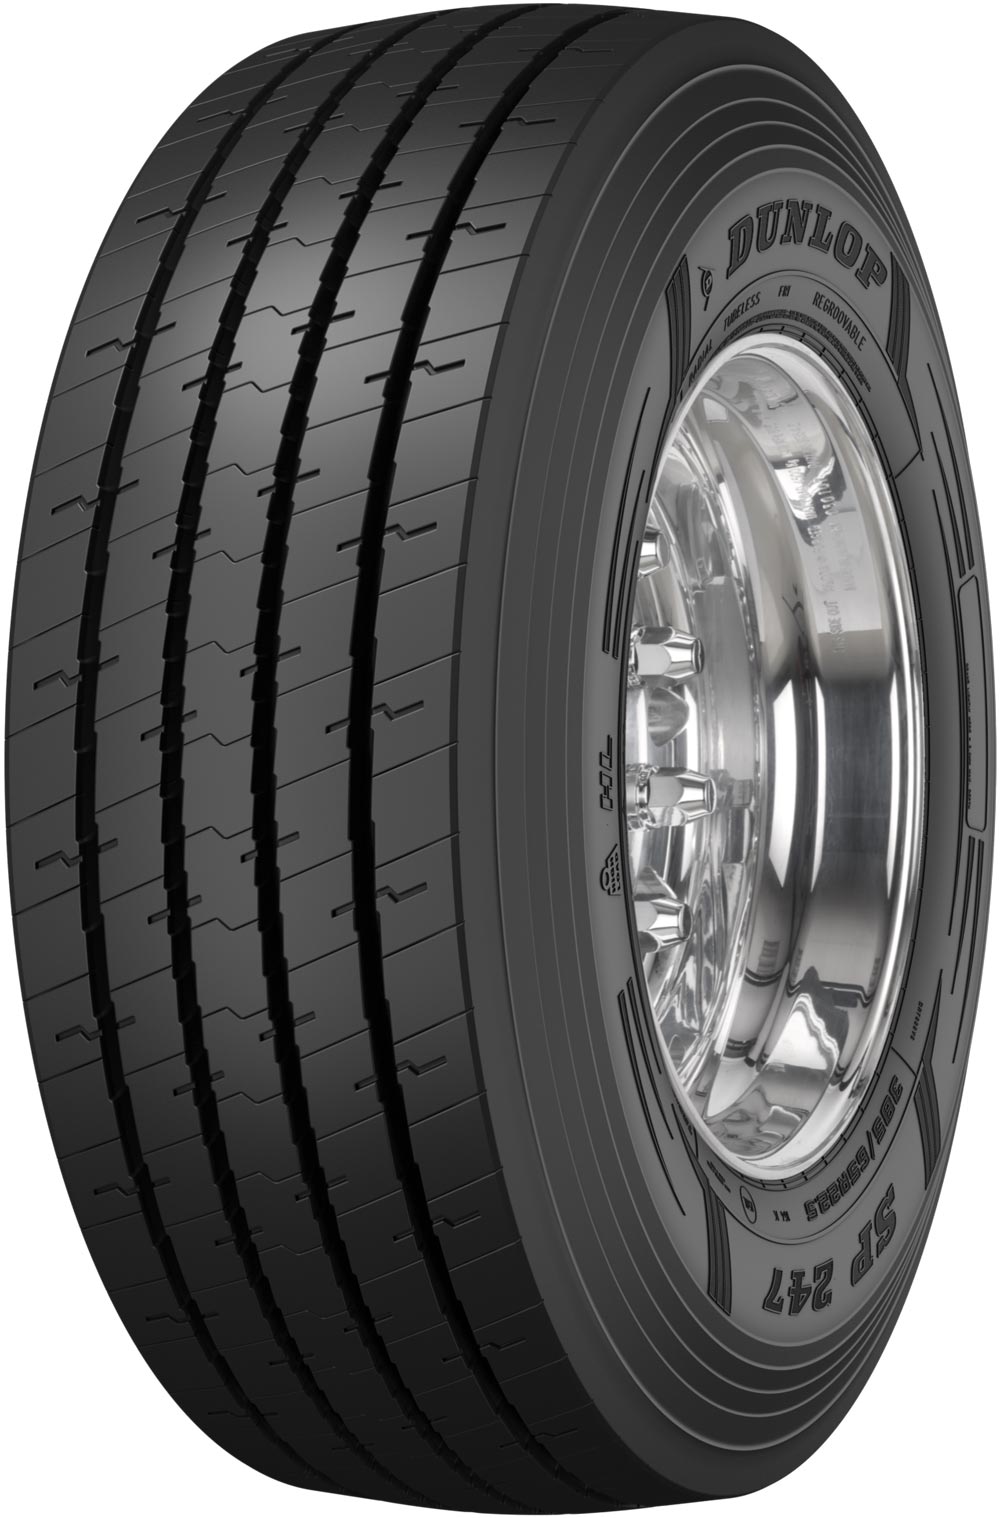 product_type-heavy_tires DUNLOP SP247 20 TL 385/55 R22.5 160K